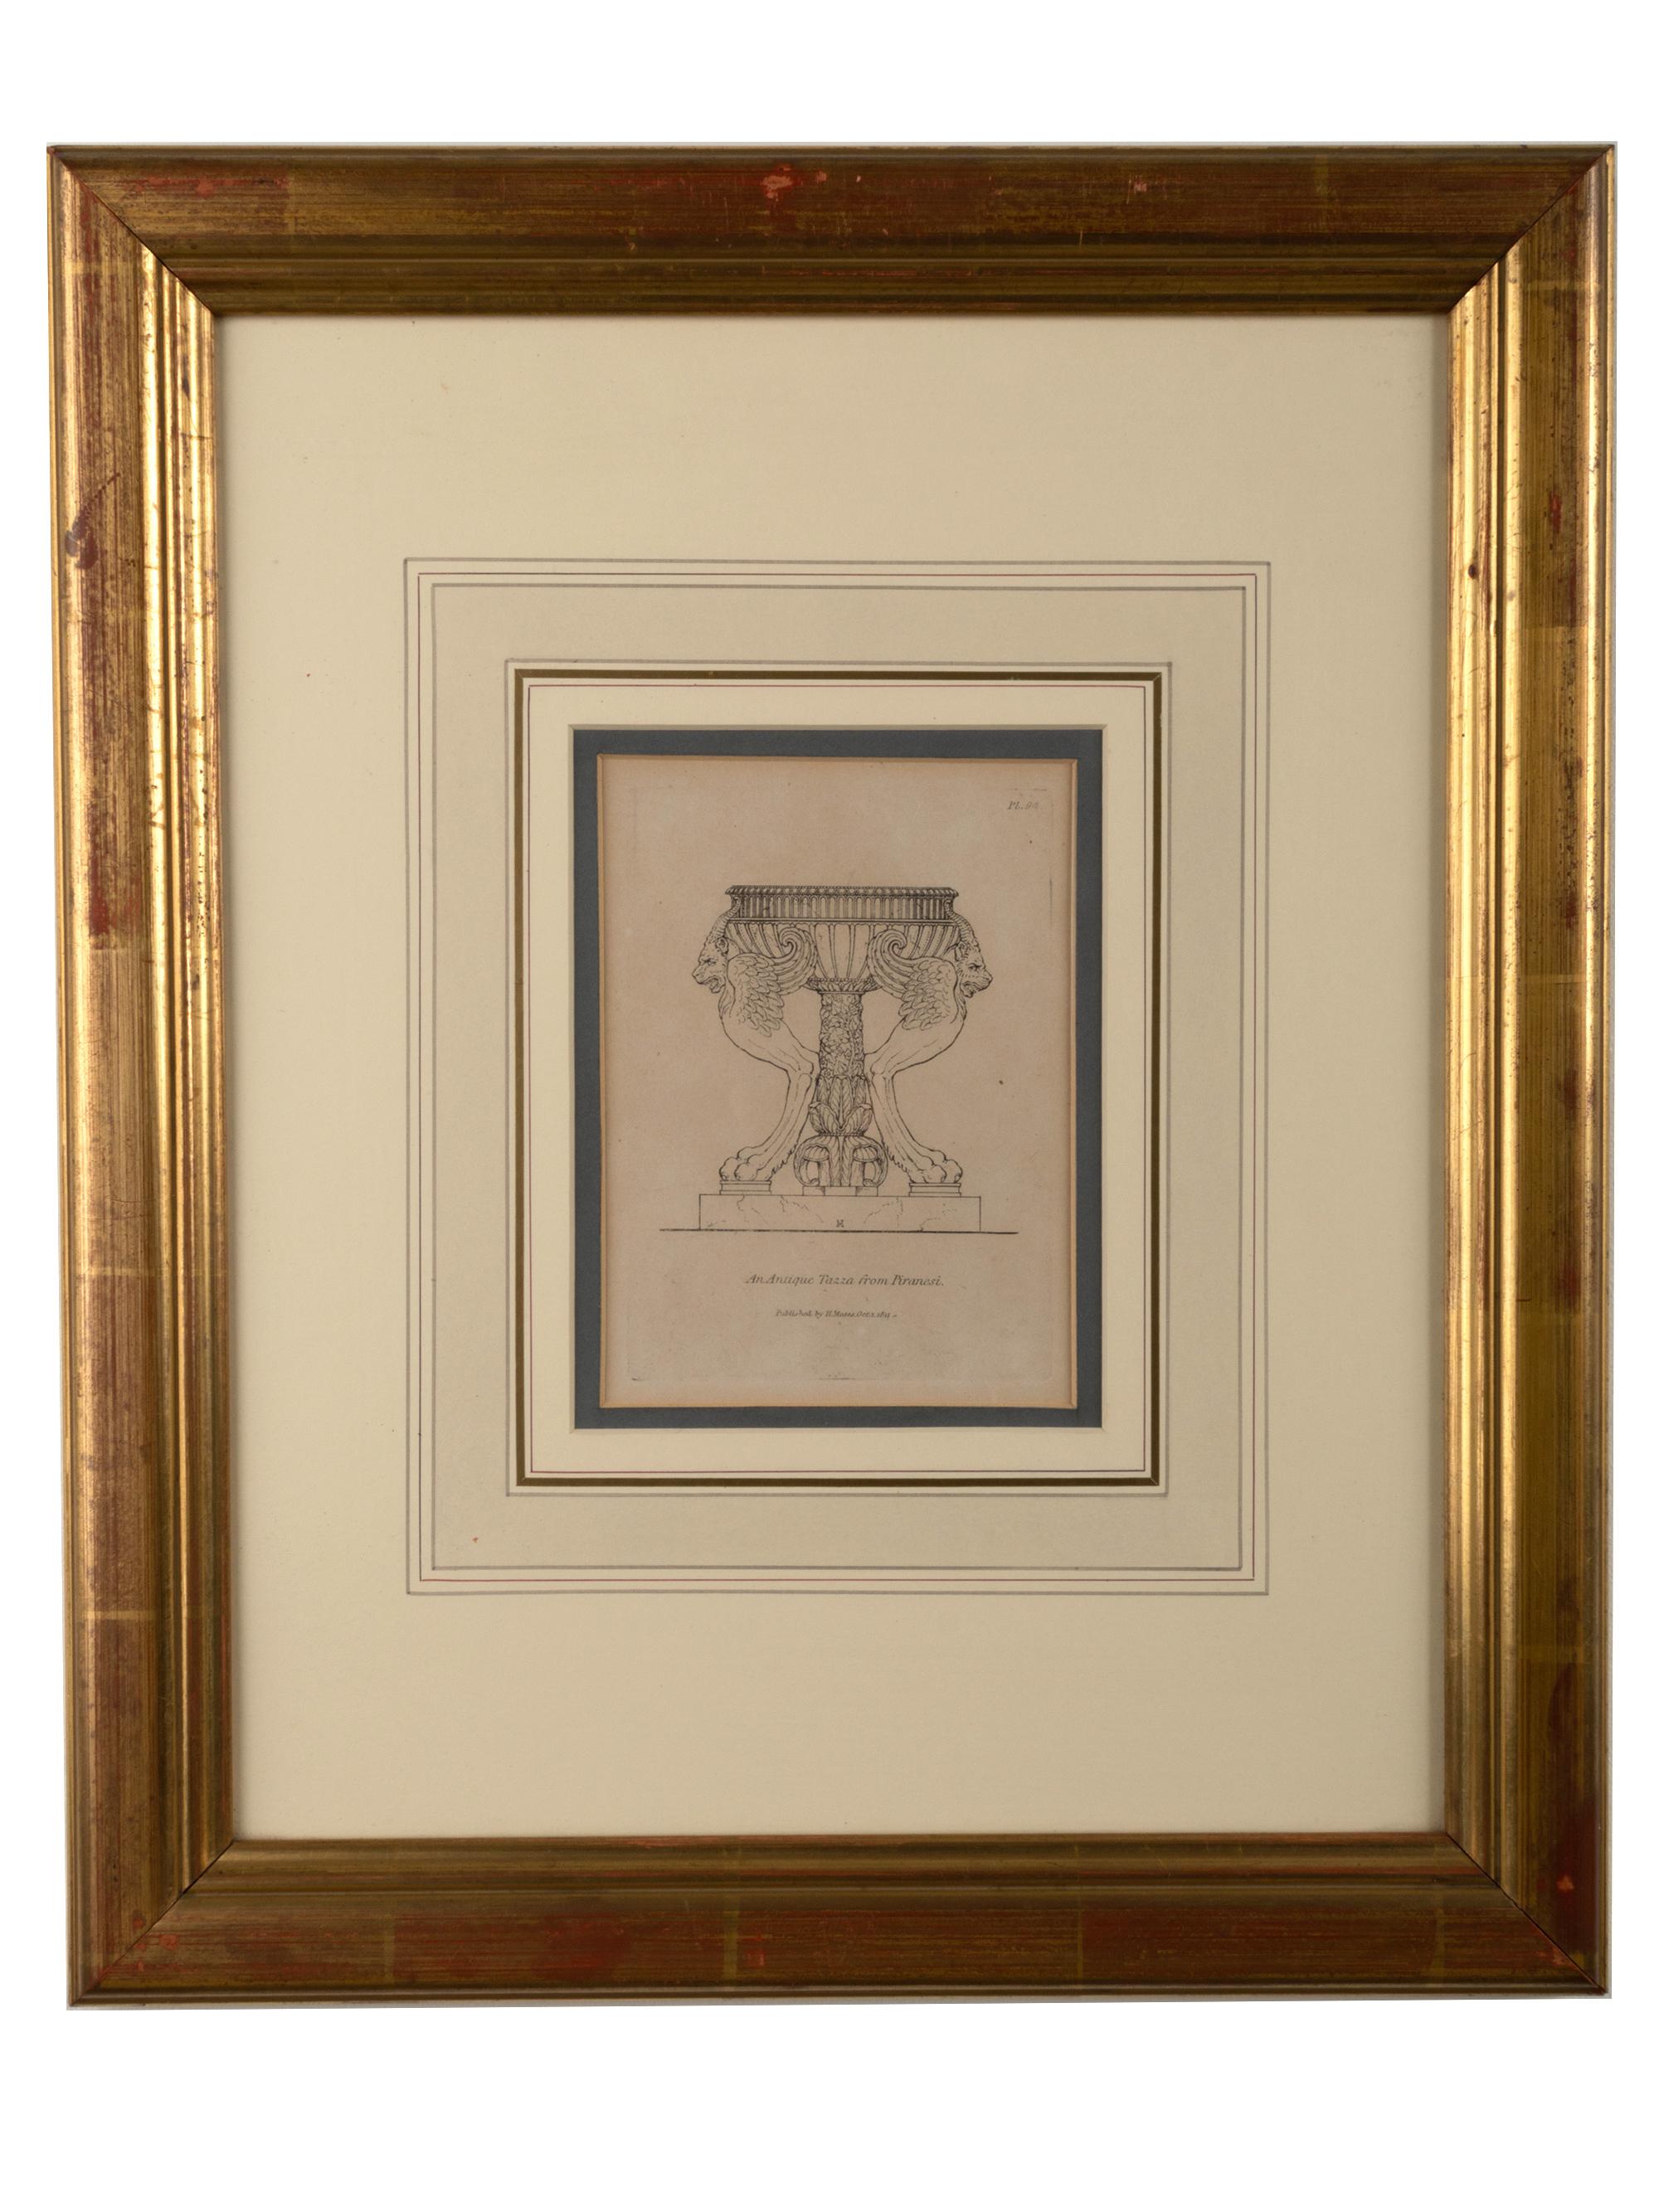 Paper Collection of Six Framed Antique 19th Century Henry Moses Engravings, circa 1811